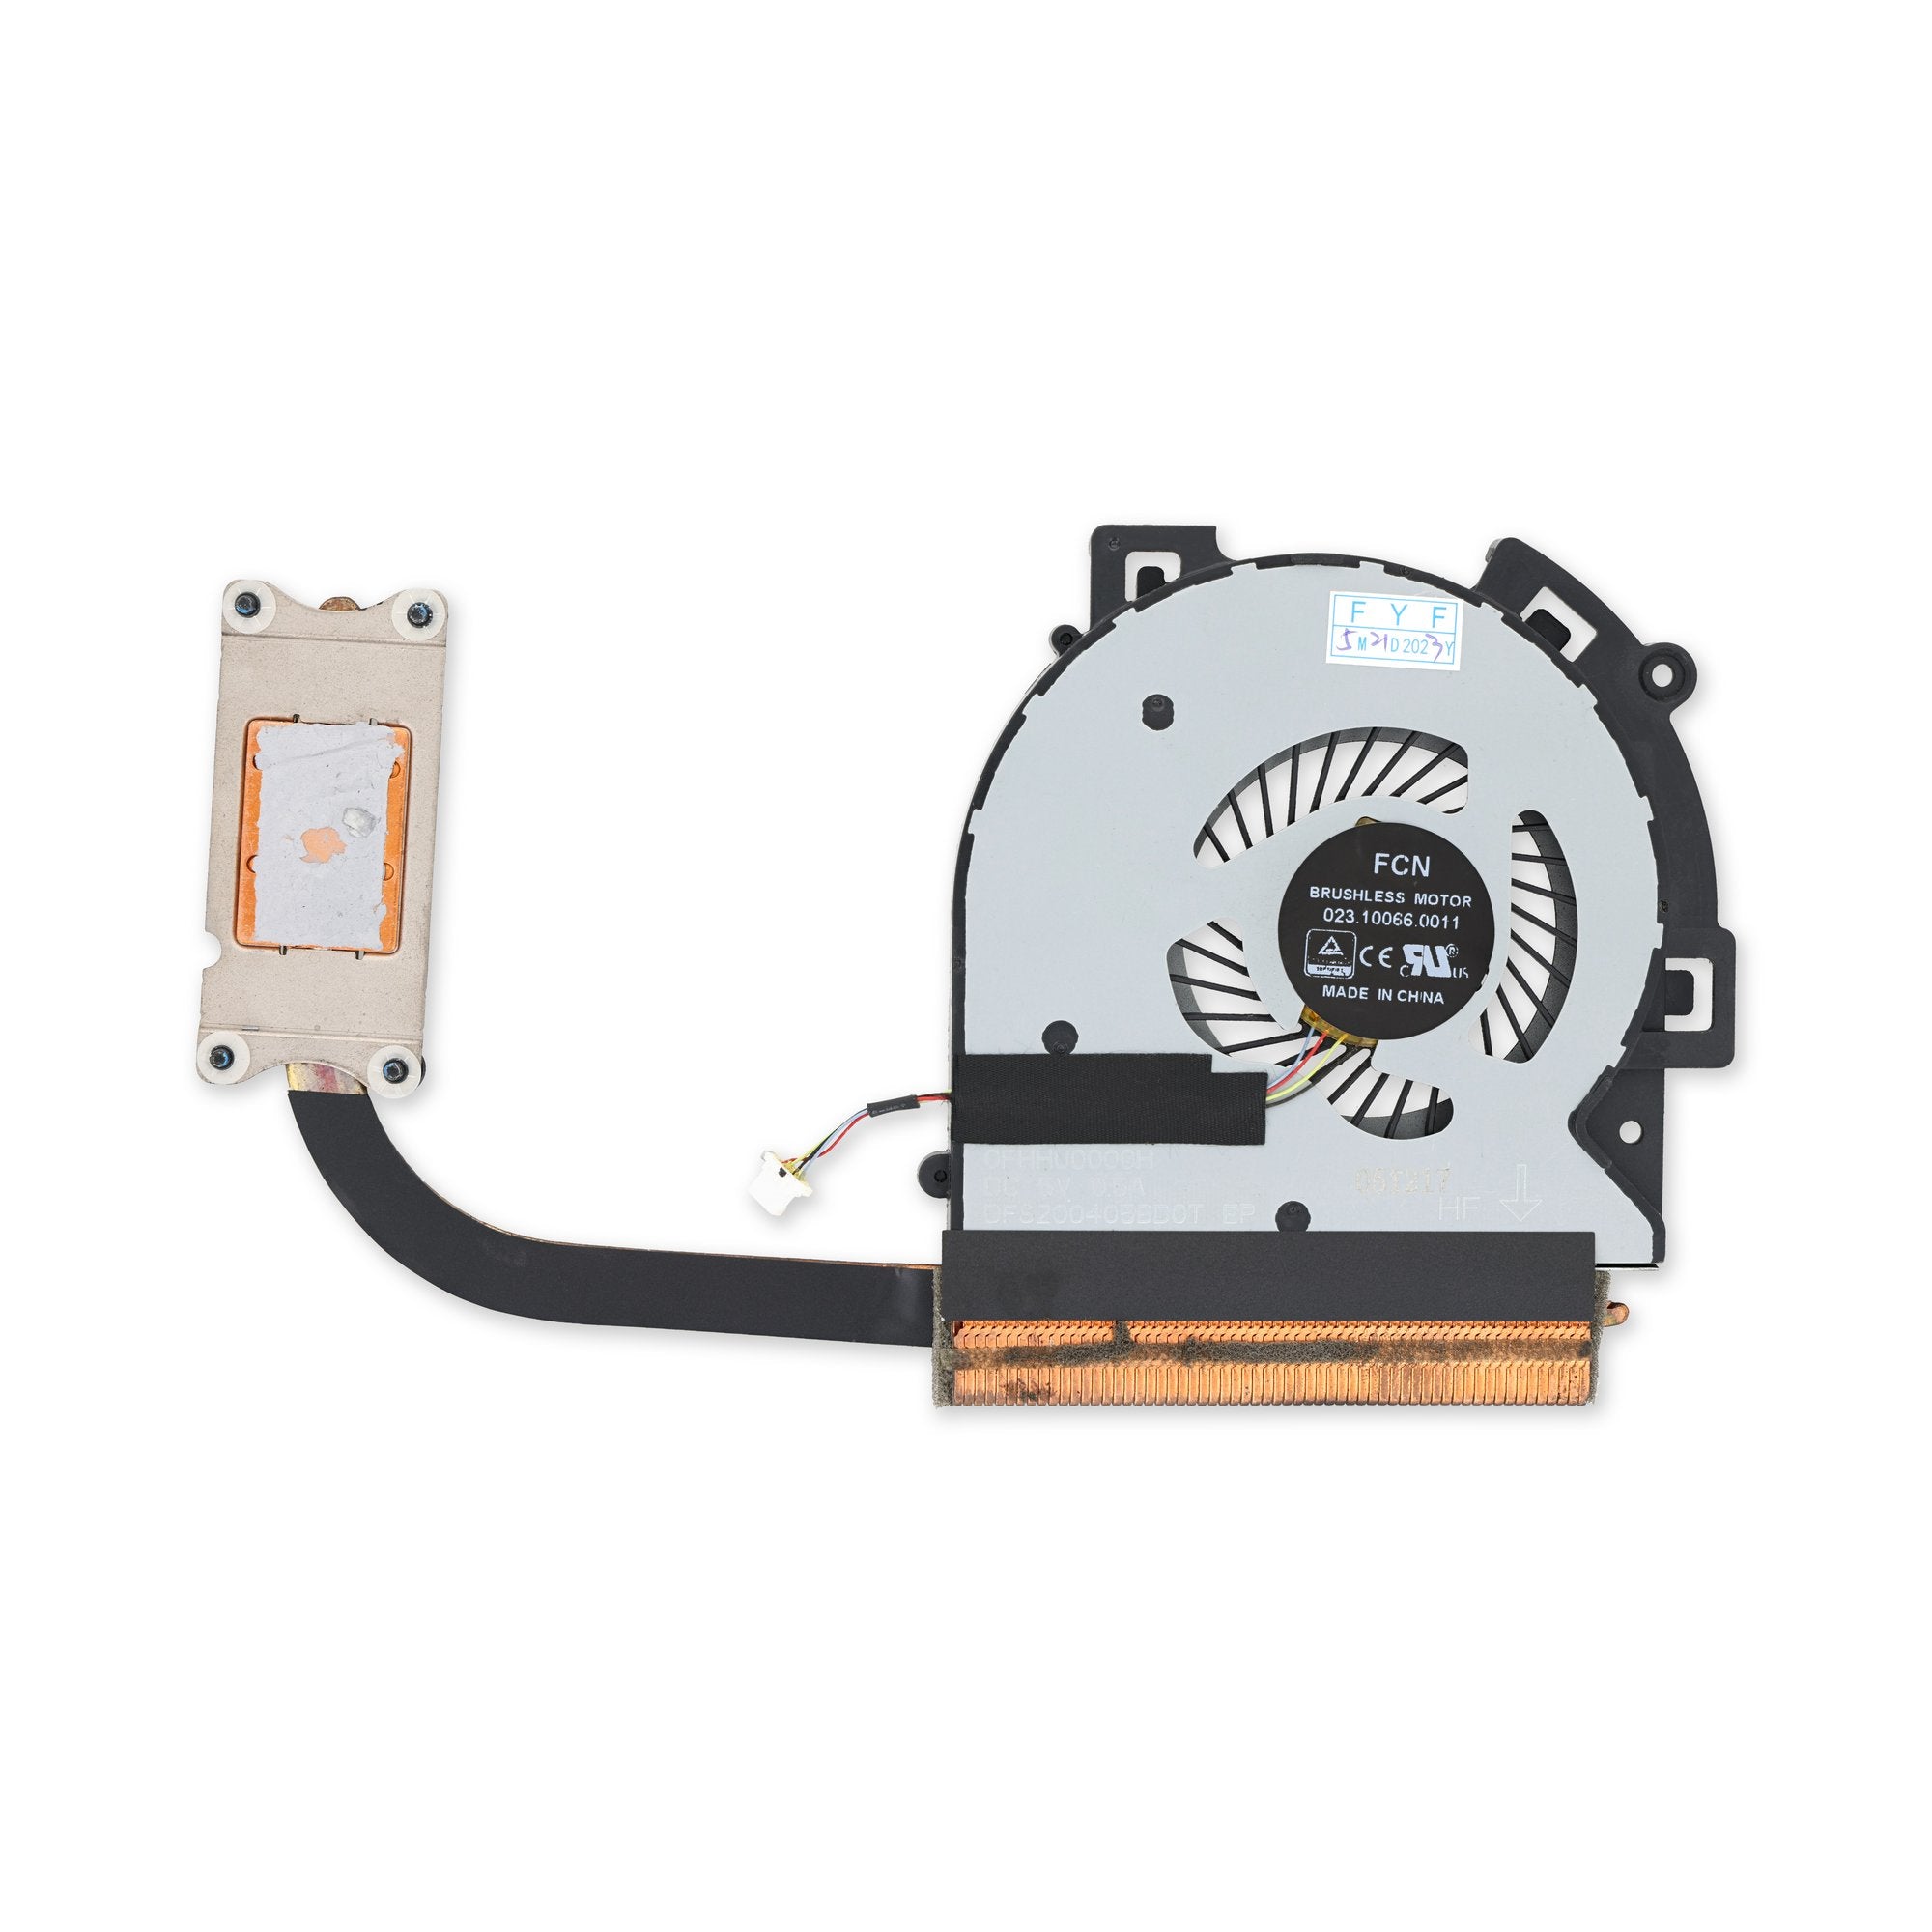 HP Envy Fan and Heat Sink Assembly - 856306-001 New